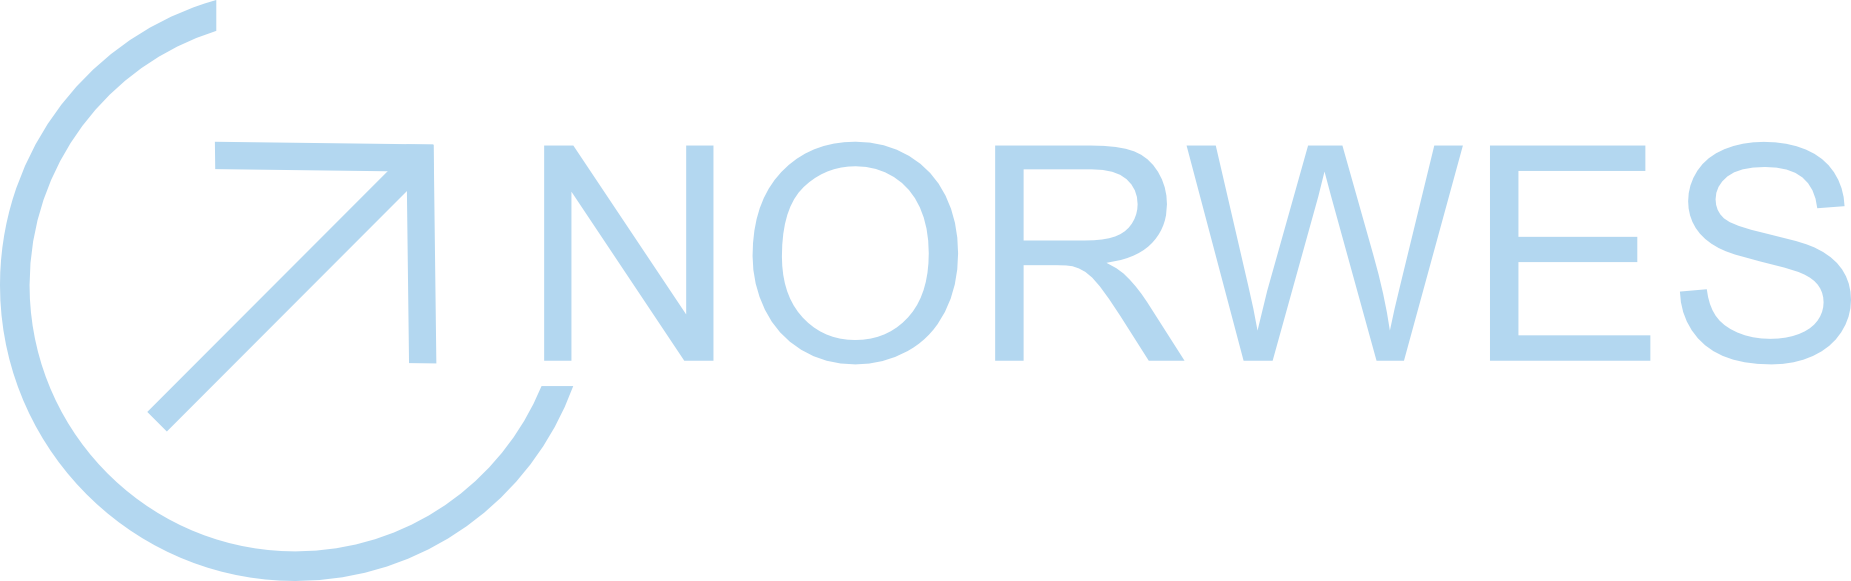 Norwes technologies